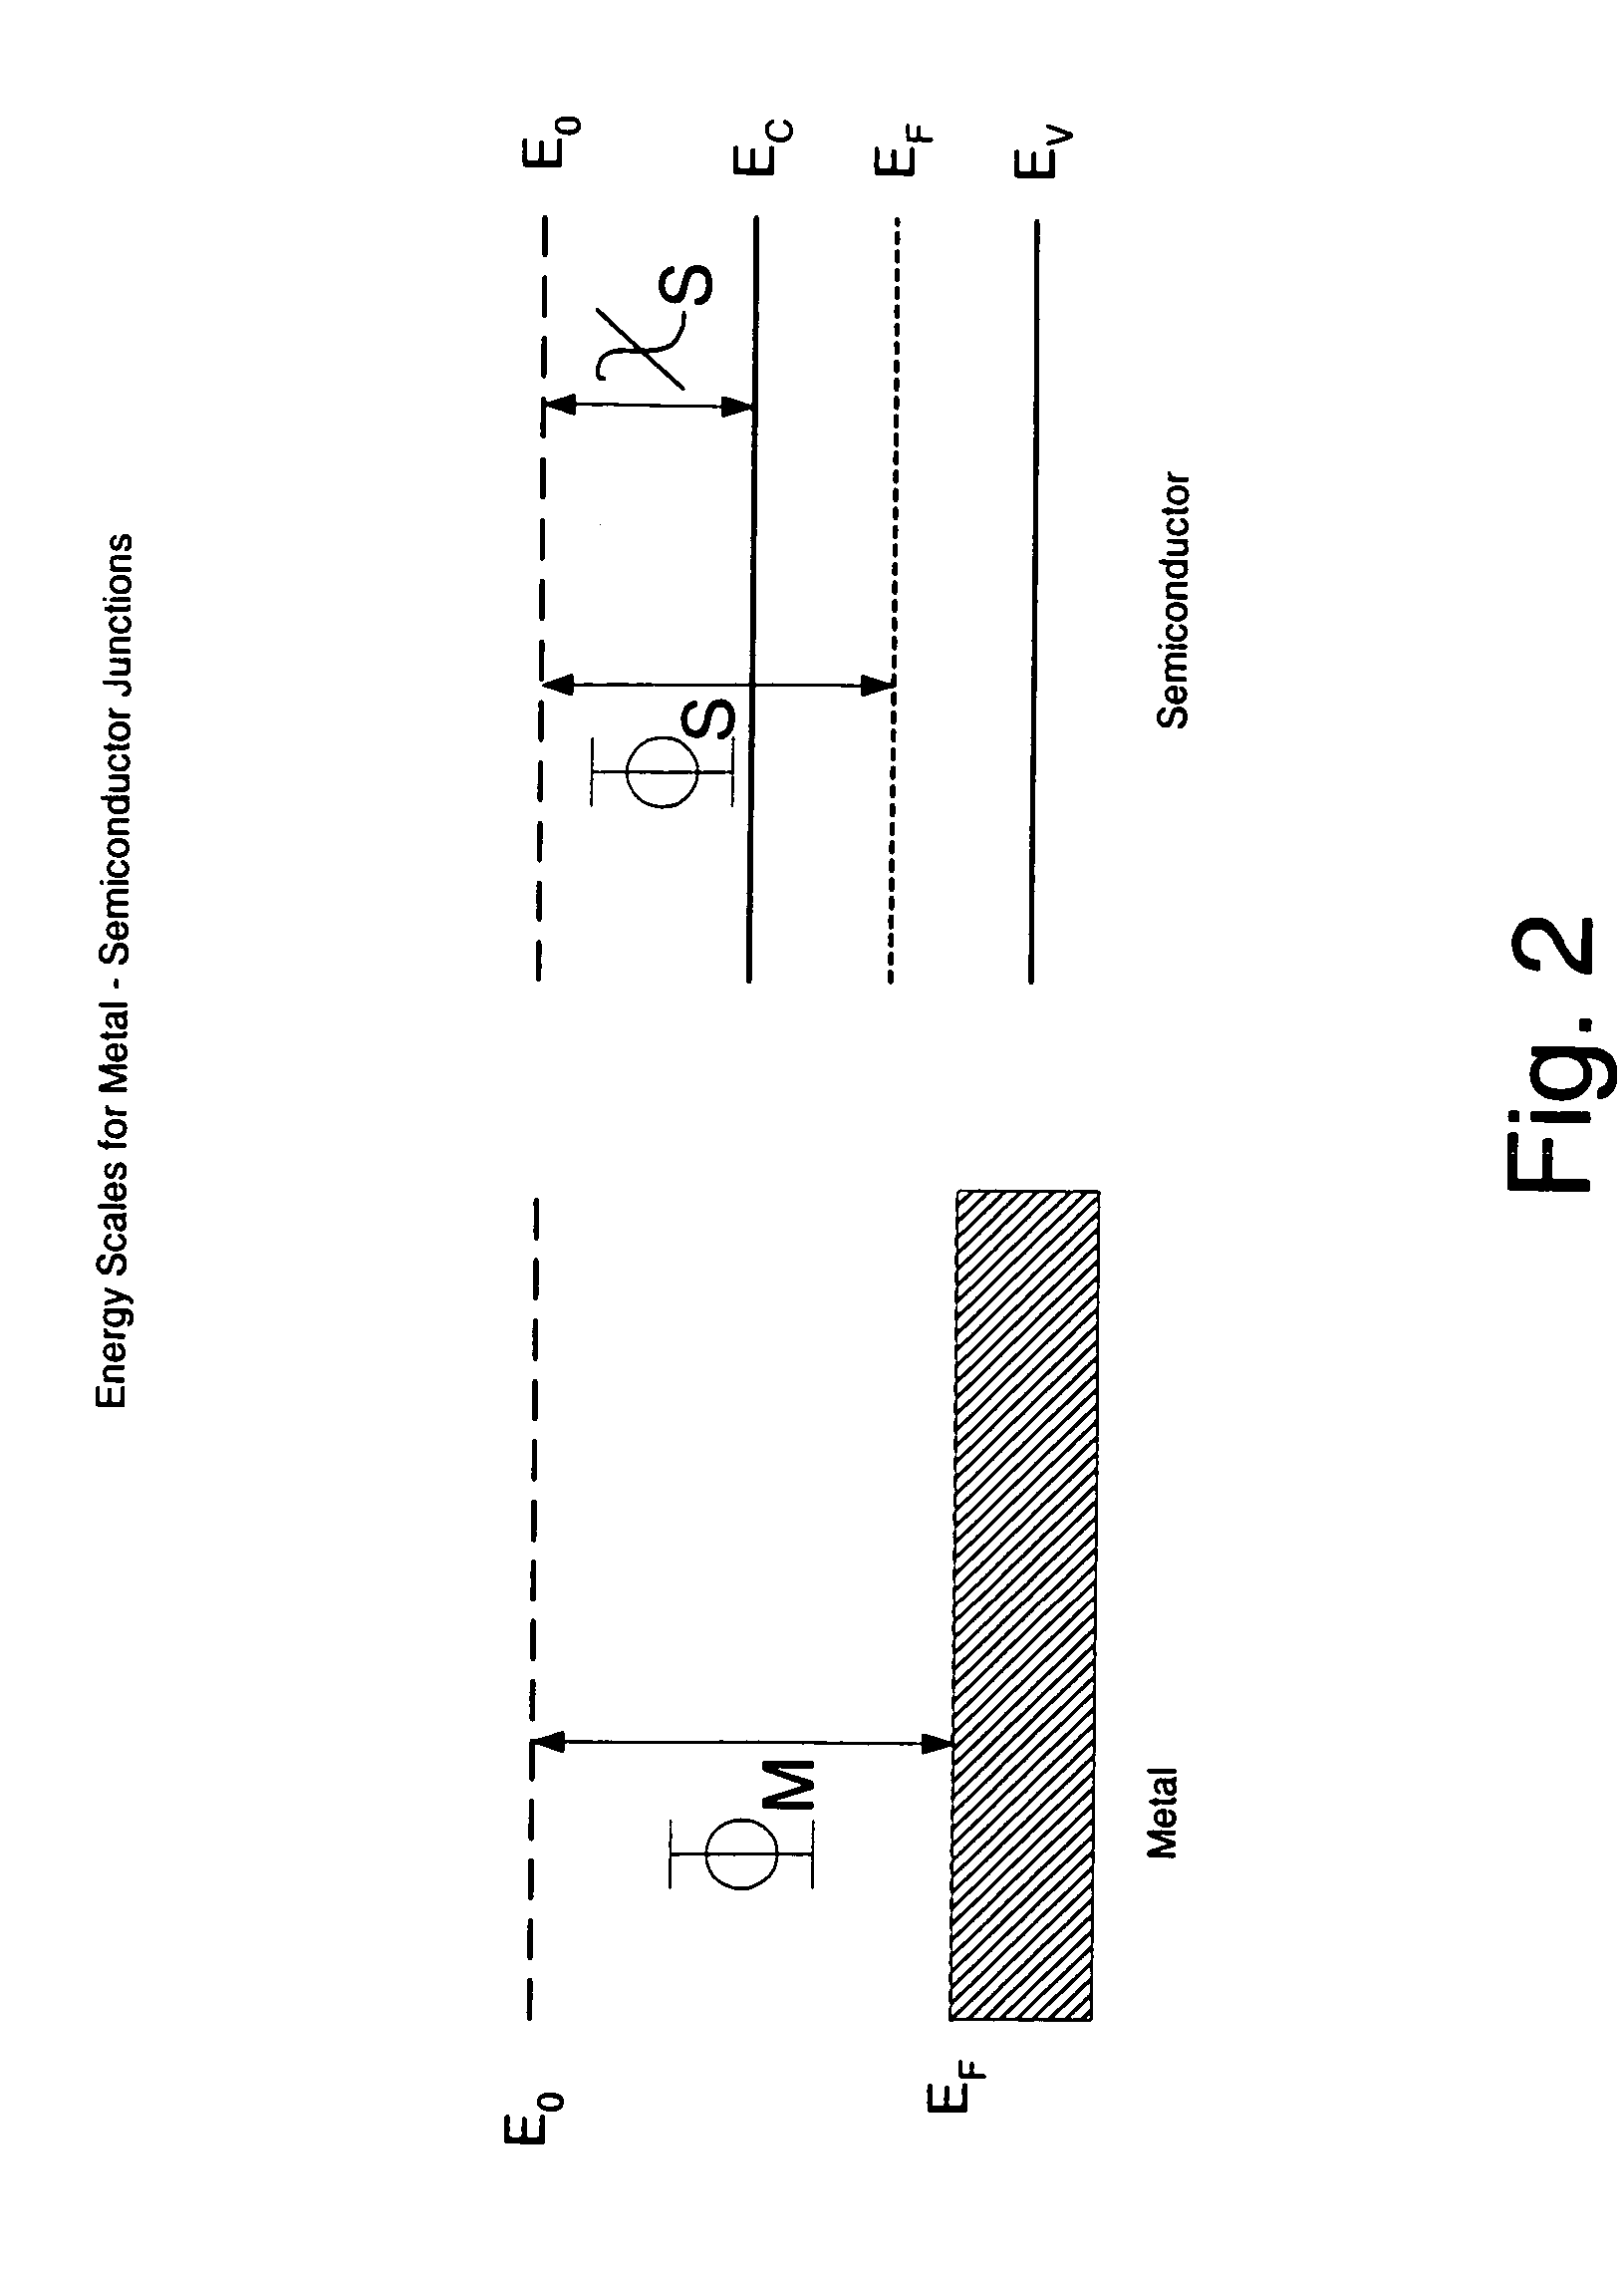 Method for depinning the fermi level of a semiconductor at an electrical junction and devices incorporating such junctions